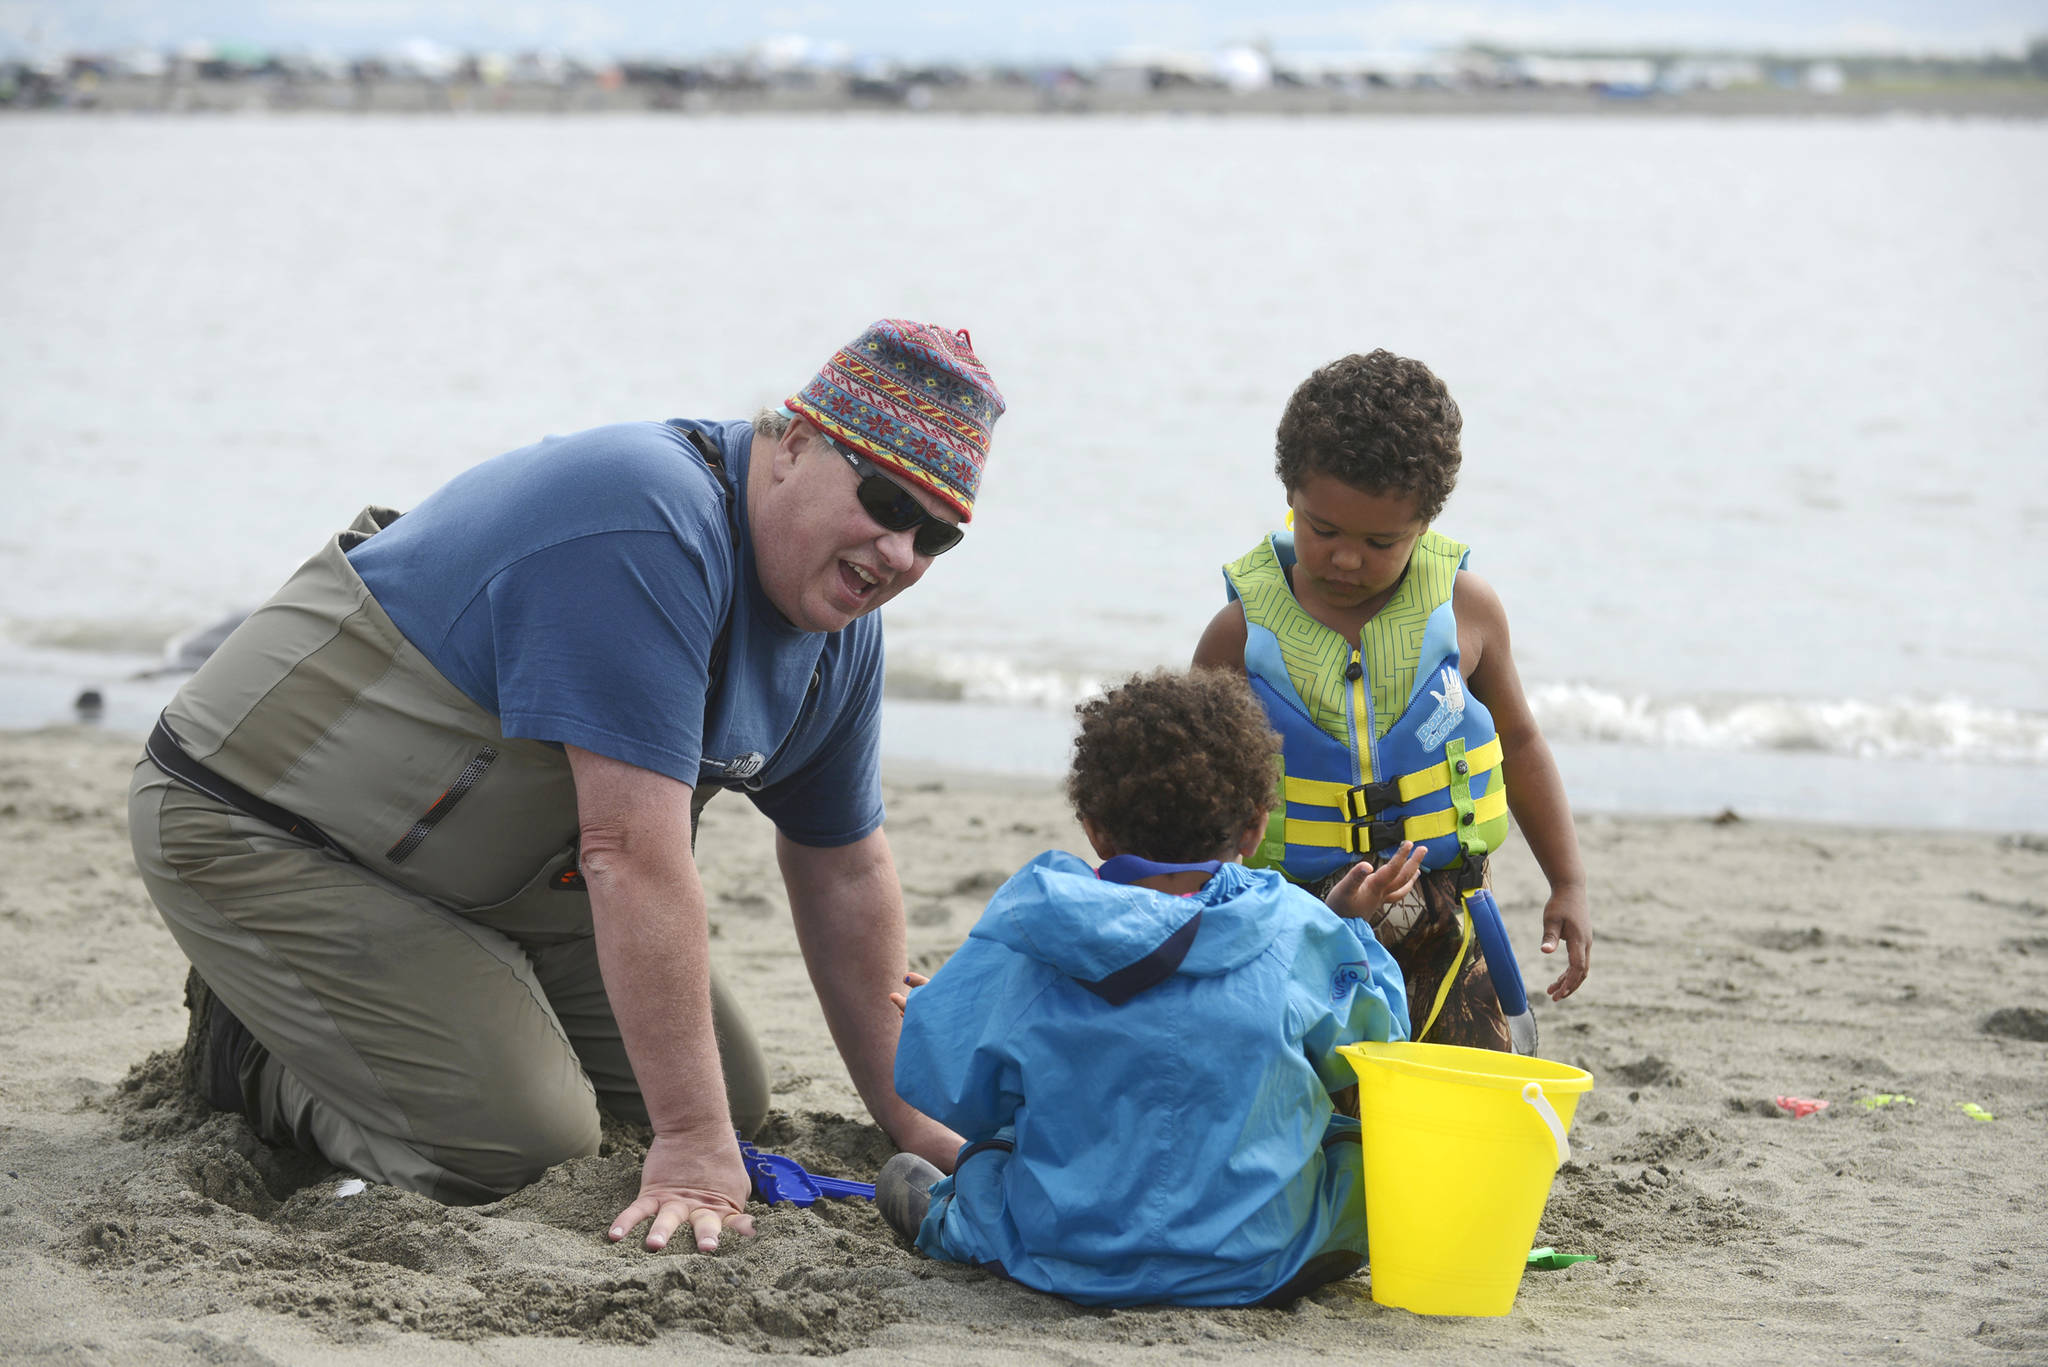 Dipnetter Brad Gamblin (left) digs in the sand of Kenai’s north beach with his grandchildren Stella (in blue) and Marly Wilson, on Thursday in Kenai. The three, plus grandmother Cher Gamblin, brought the grandchildren on their first dipnetting trip this year. The morning, Brad Gamblin said, “was very productive.” Getting up early, he said the family had caught a dozen salmon by 9 a.m. (Ben Boettger/Peninsula Clarion)